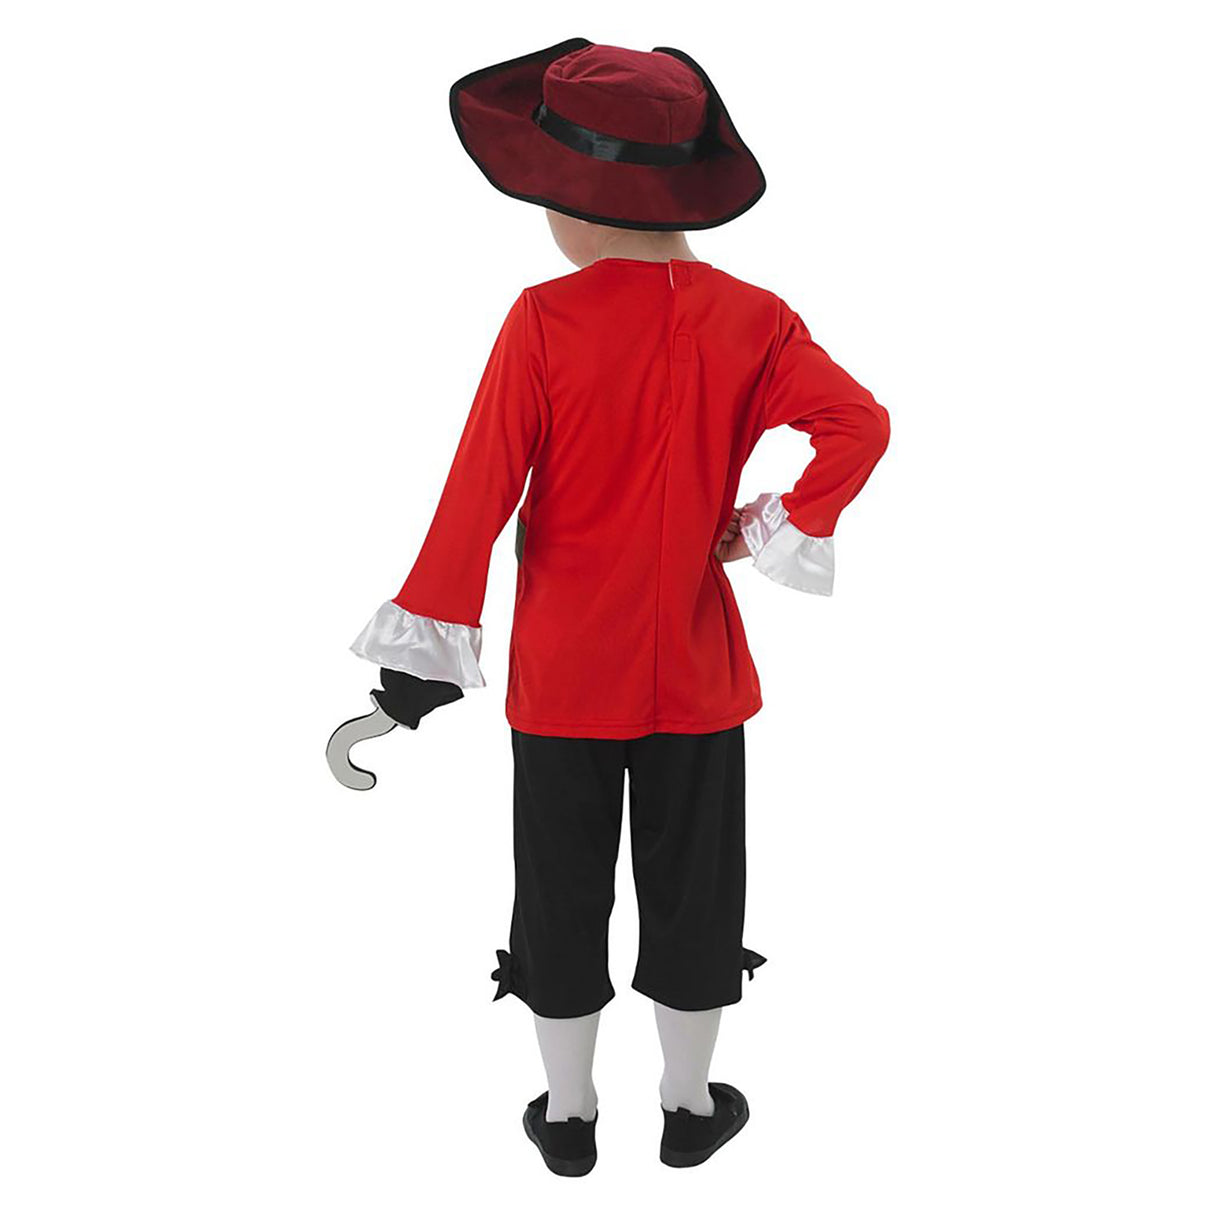 Rubies Captain Hook Child Costume, Red (5-6 years) – Toys R Us